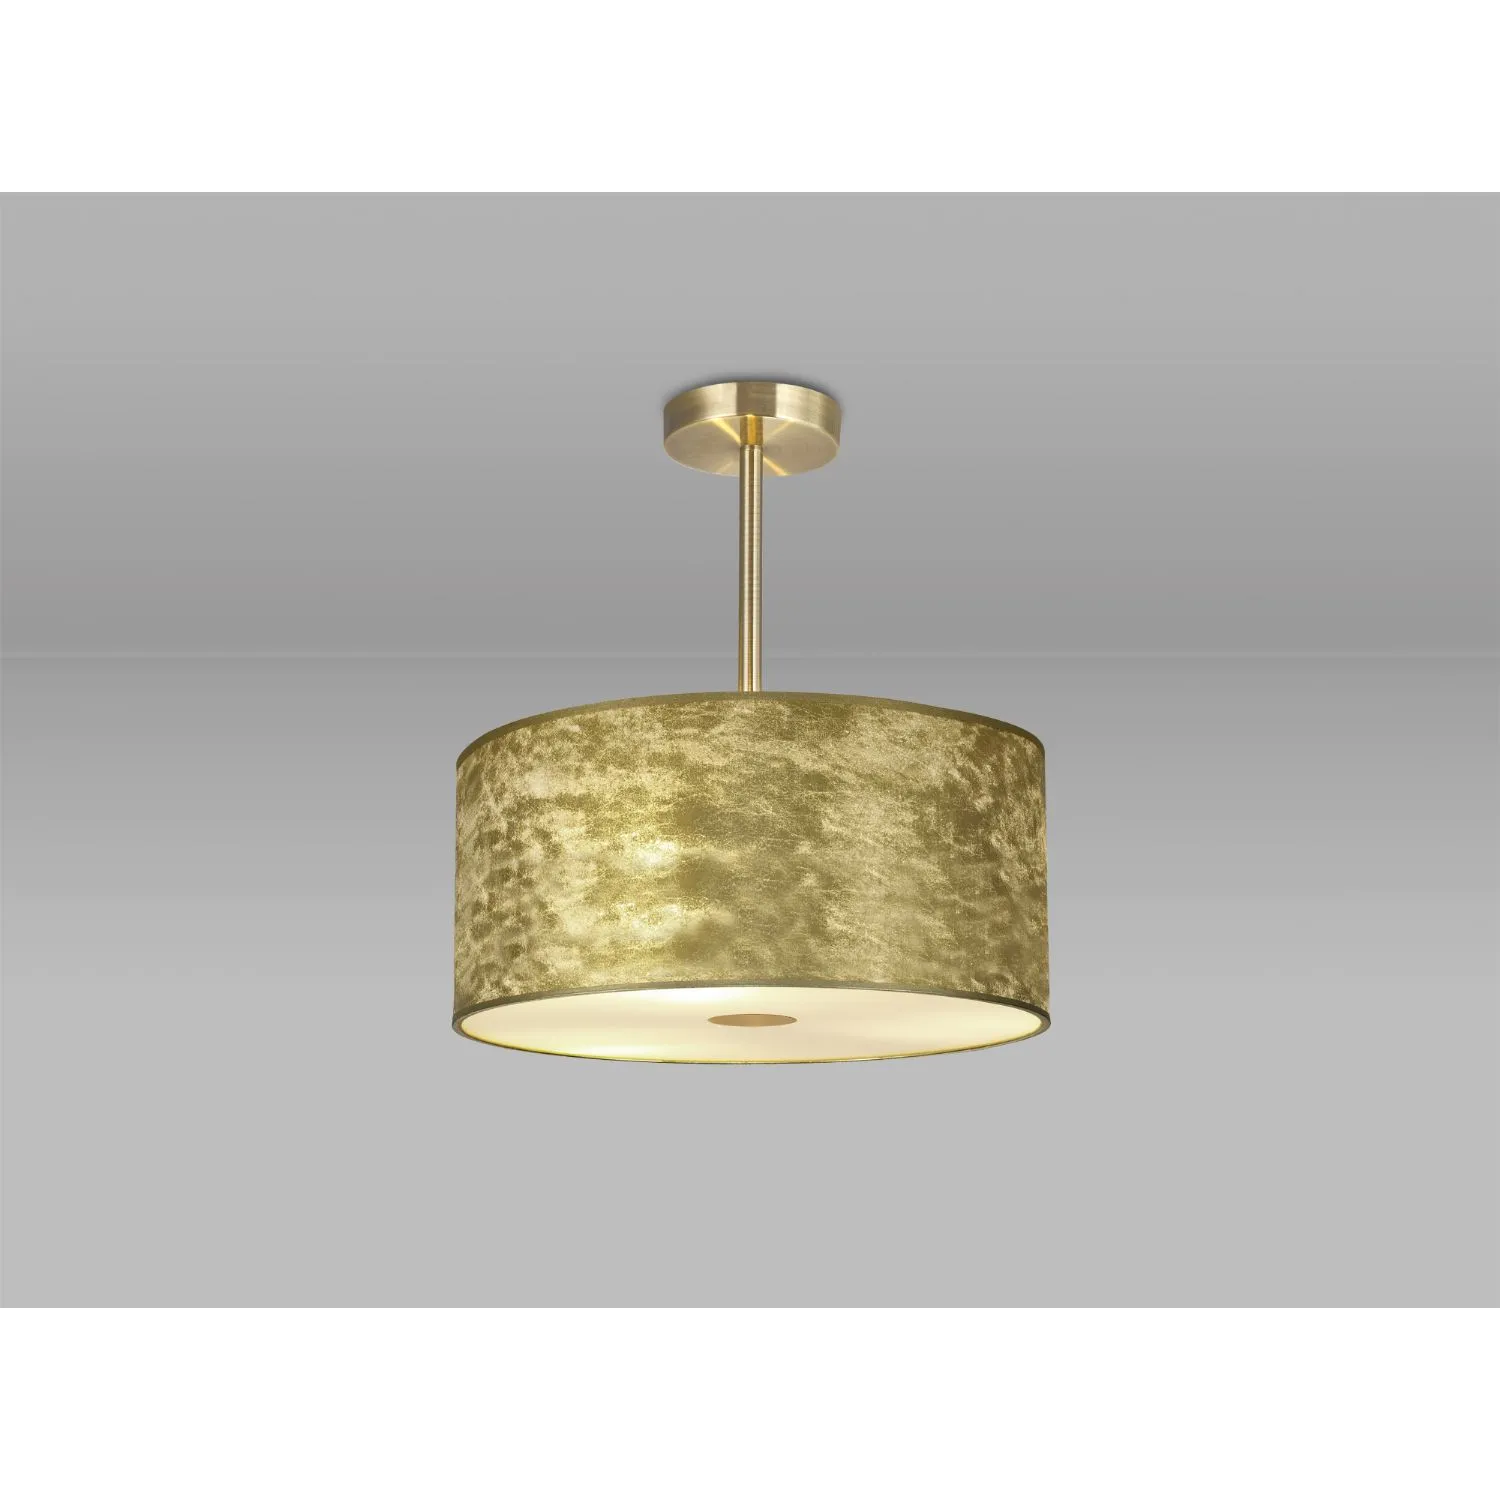 Baymont Antique Brass 3 Light E27 Semi Flush Fixture With 400mm Gold Leaf Shade With Frosted Acrylic Diffuser With Antique Brass Centre